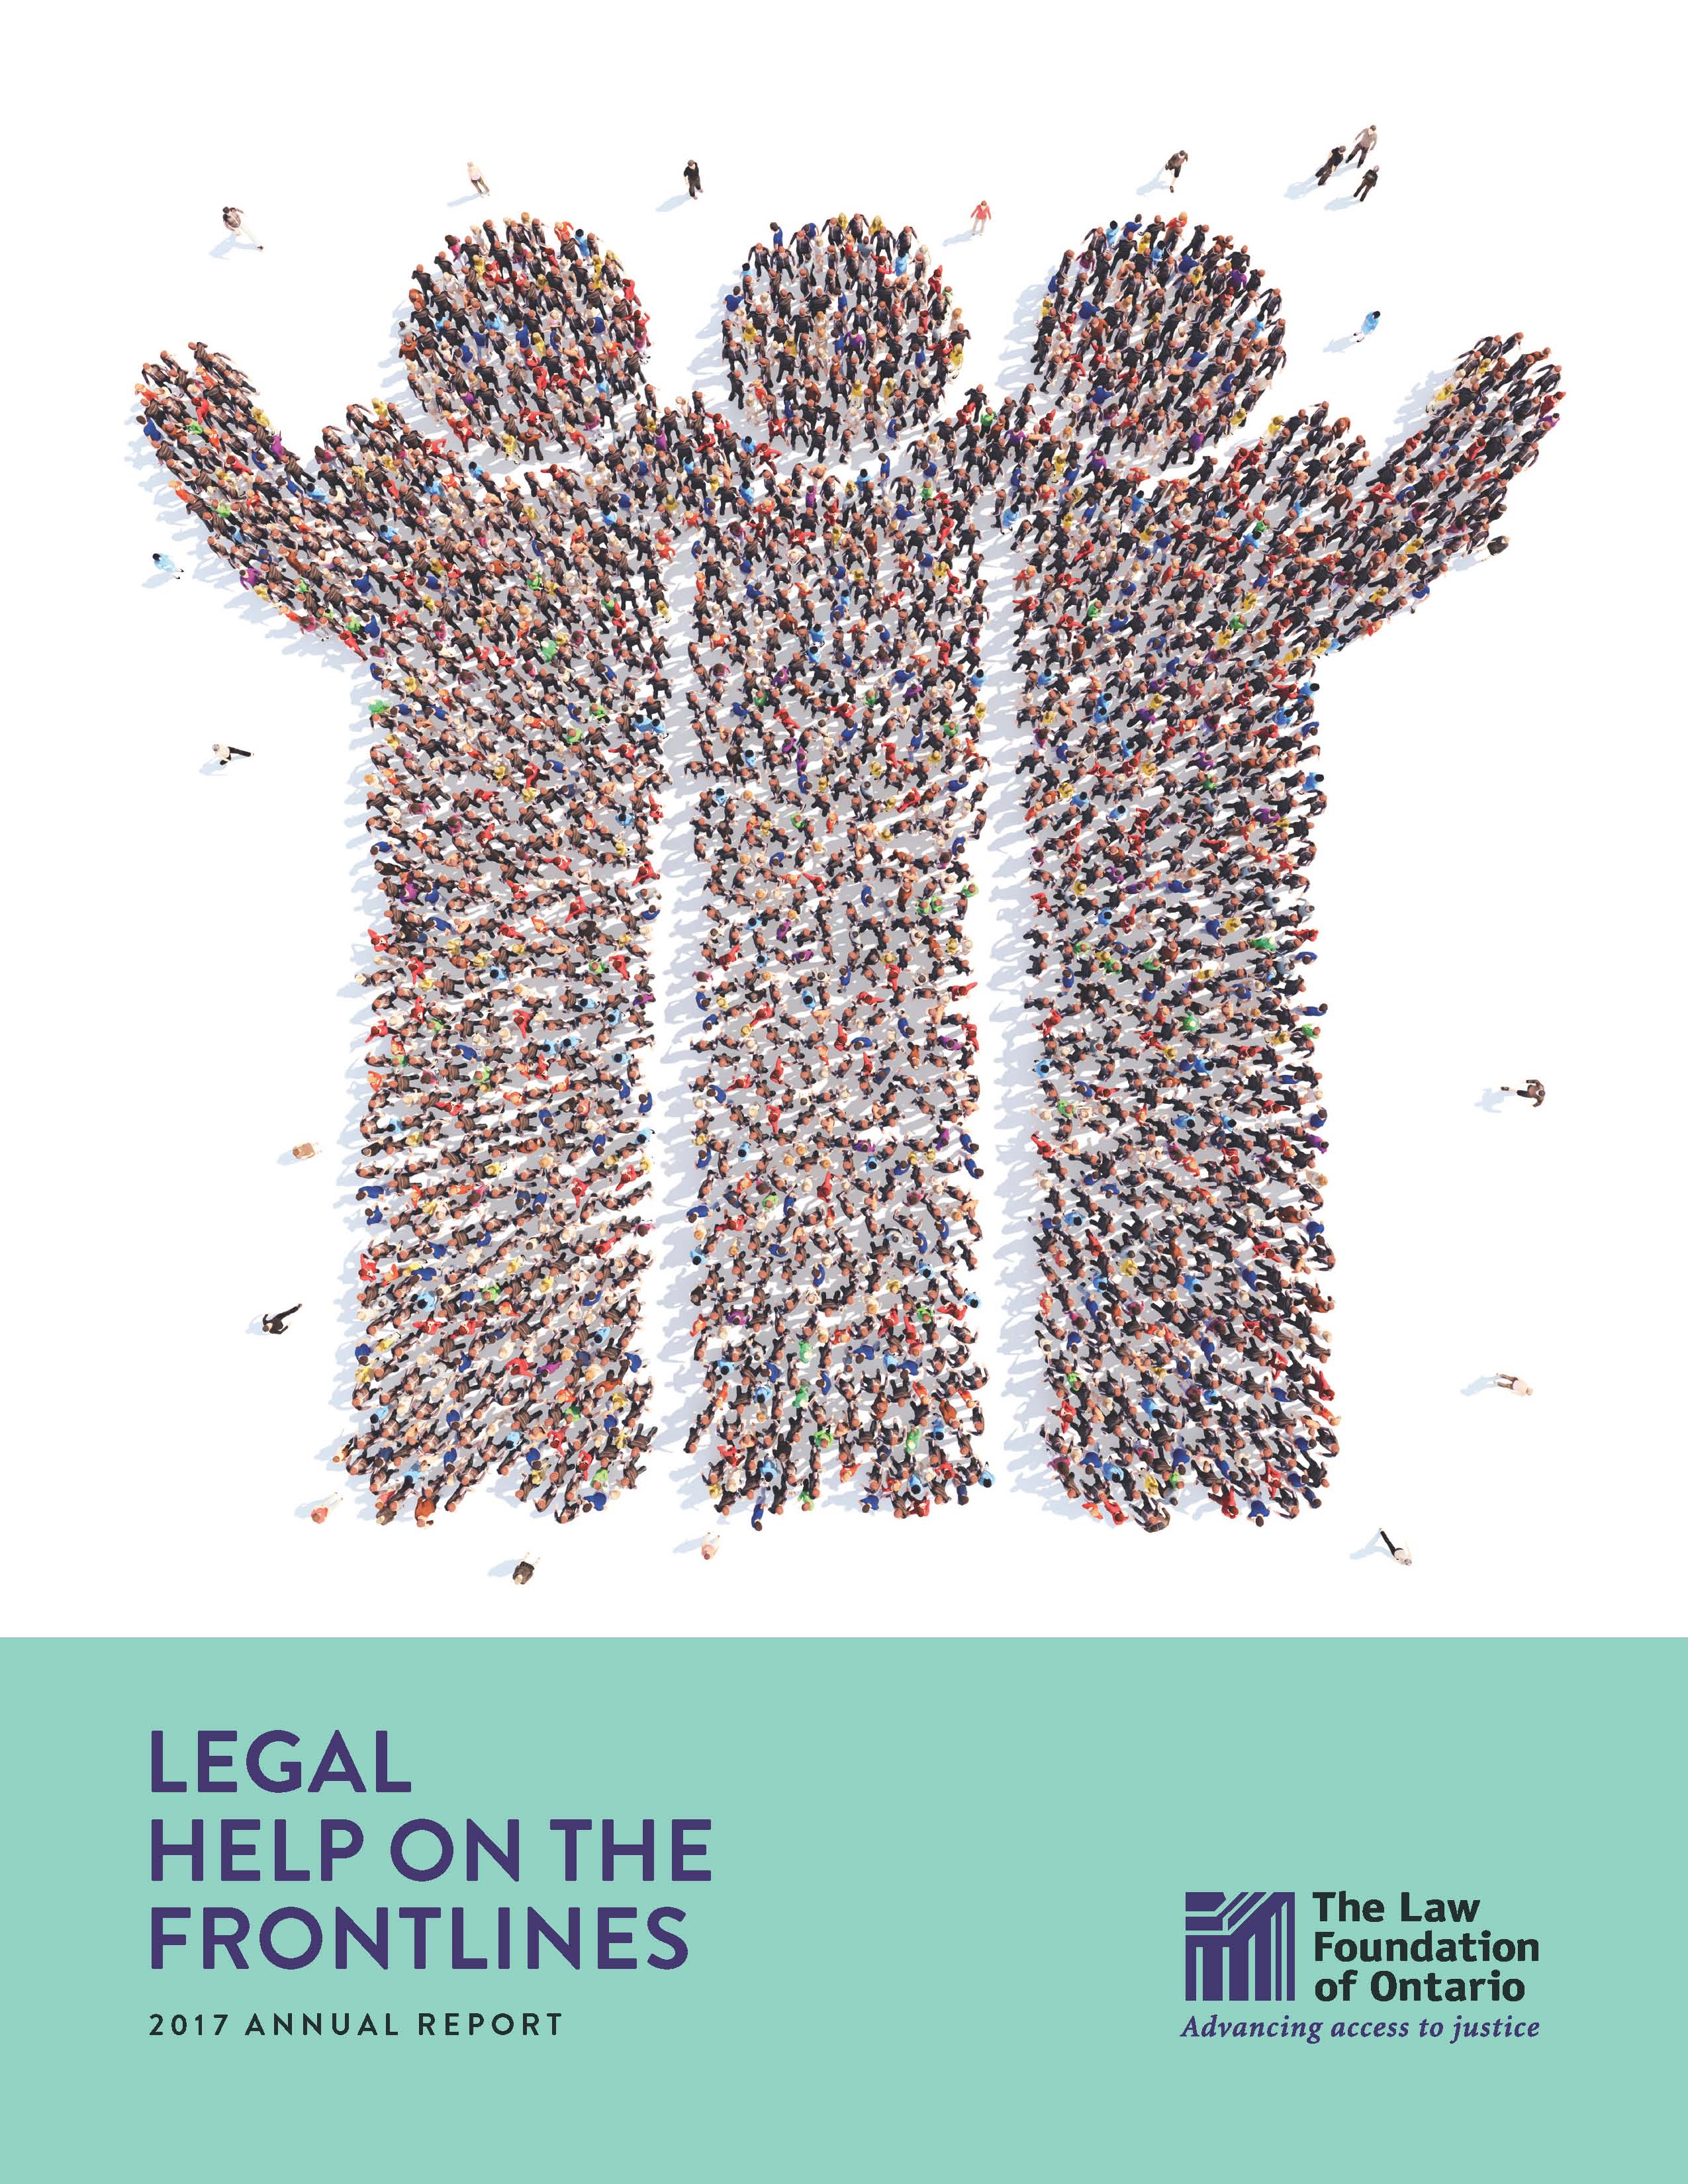 2017 Annual Report, Legal help on the frontlines